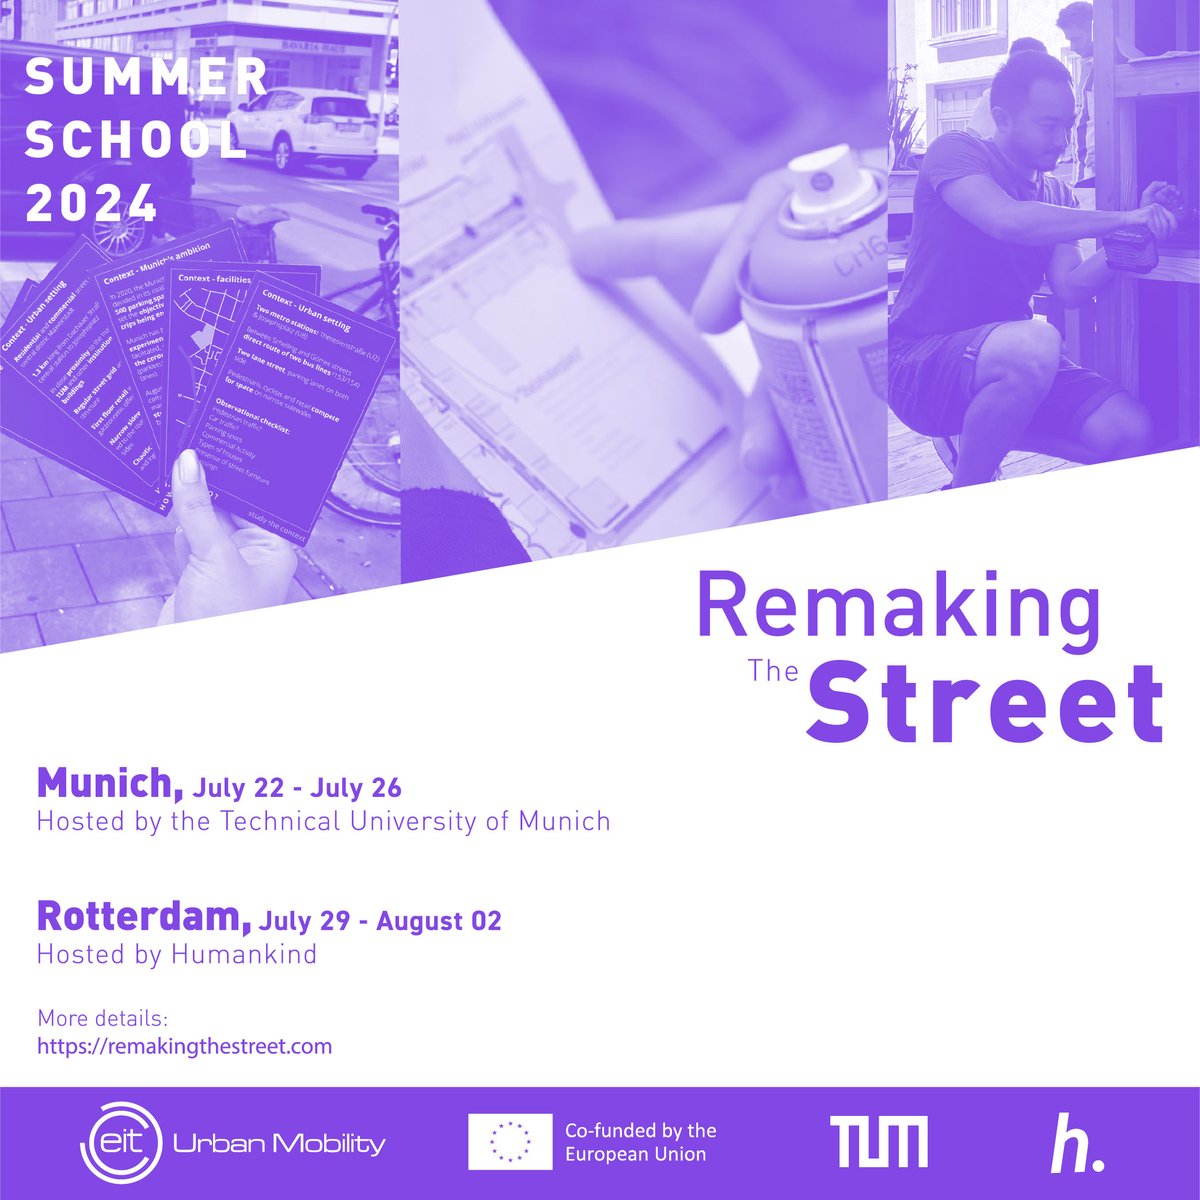 ✍️Early bird registration for #RemakingTheStreet #SummerSchool is open until April 15.

‼️Don´t miss it out this great program set up by @RGAccessibility @humankindcity @st_experiments @EITUrbanMob 

ℹ️ More info: remakingthestreet.com